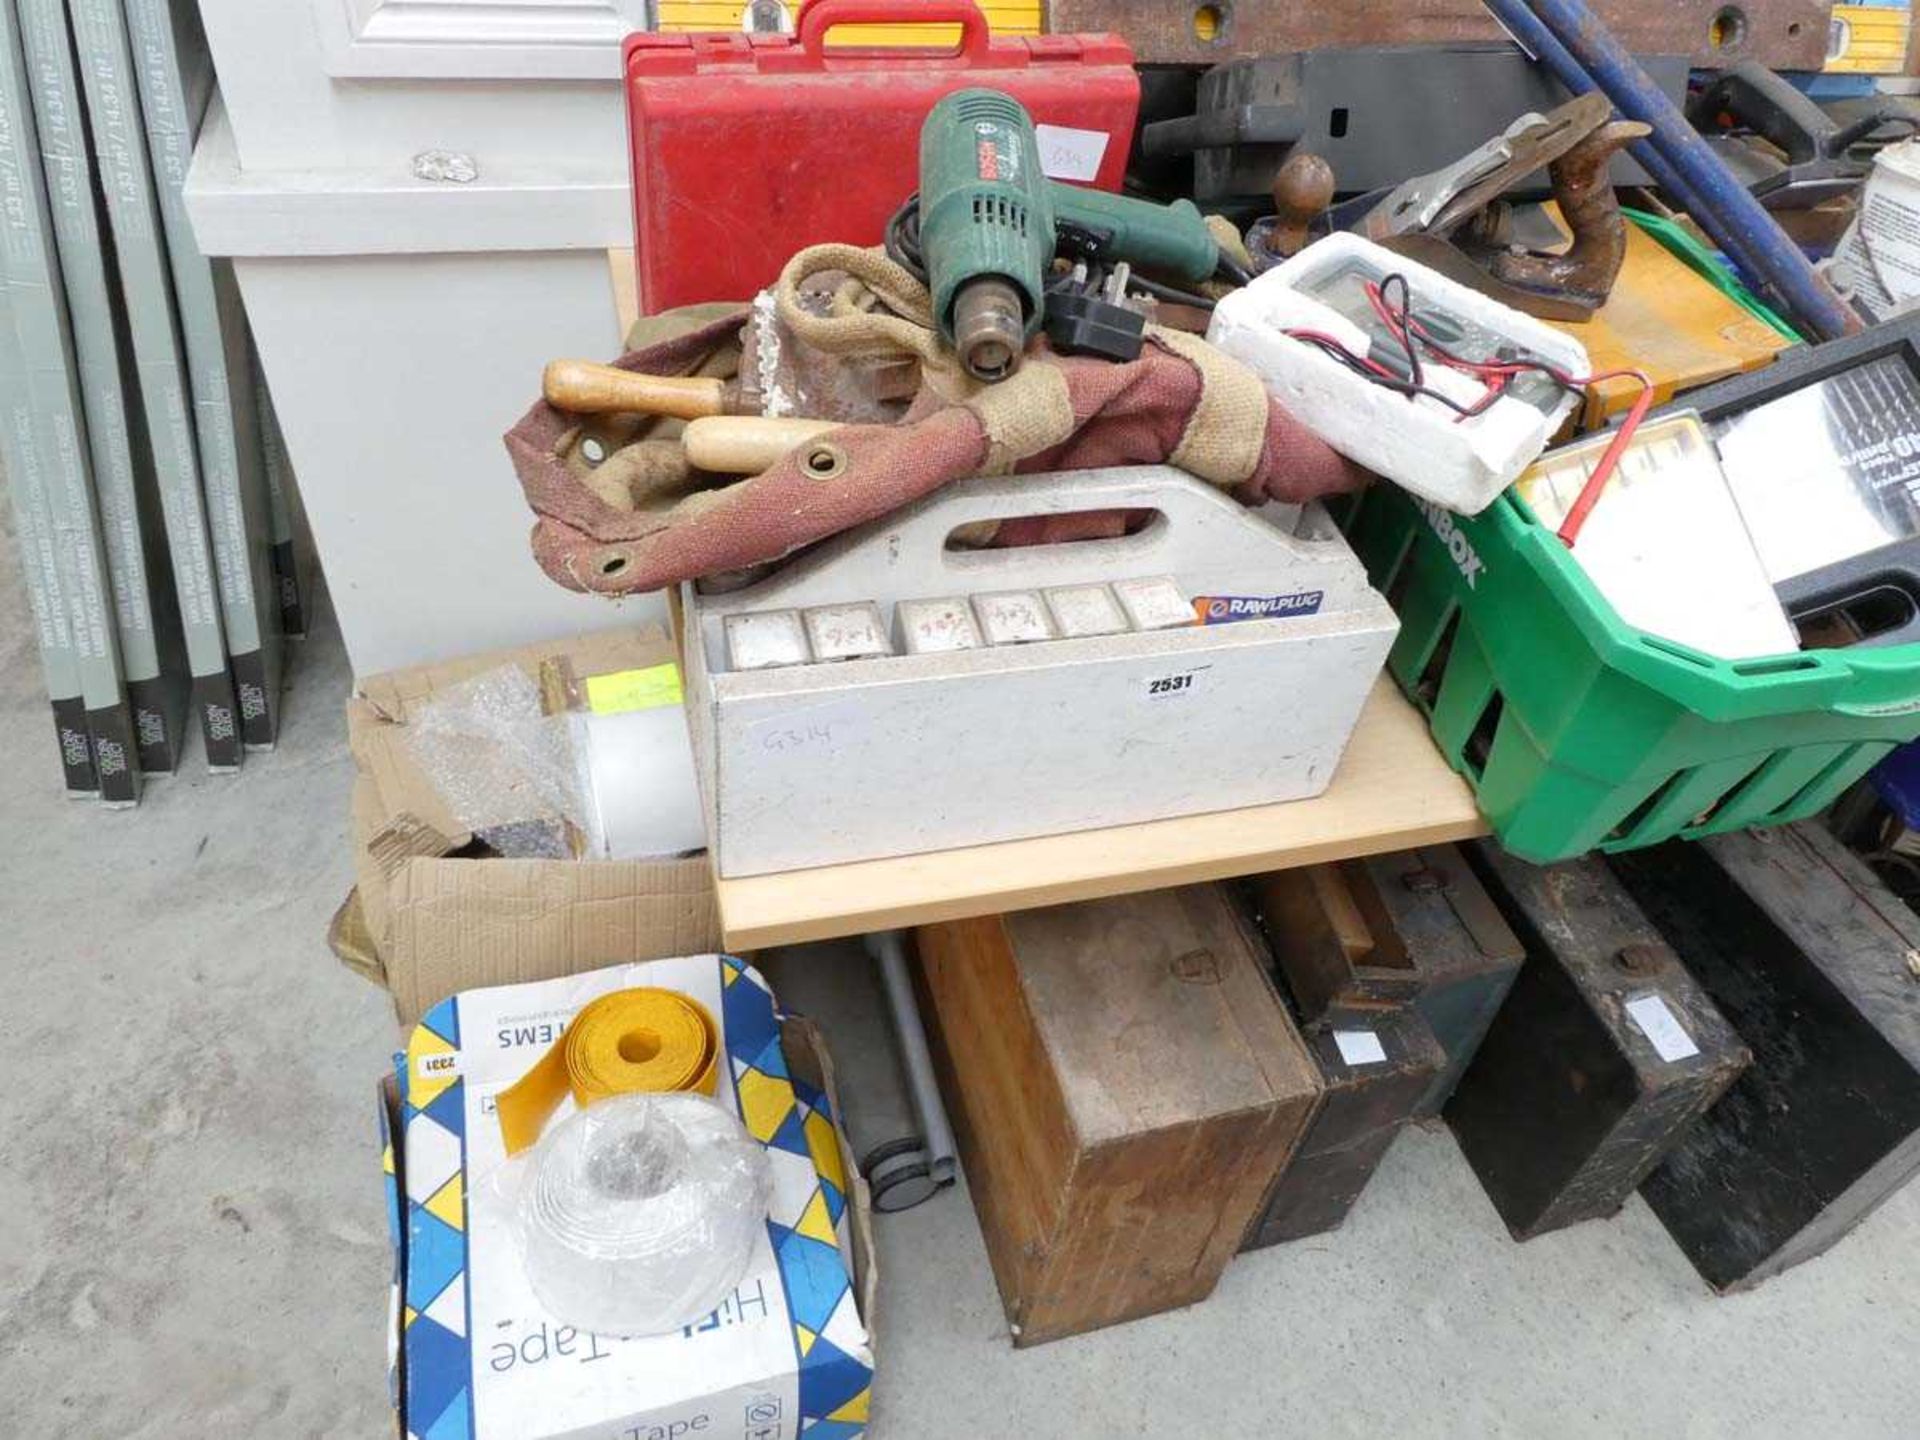 Tabletop and undertable collection of various tools, to include heat guns, electric planers, - Image 2 of 8